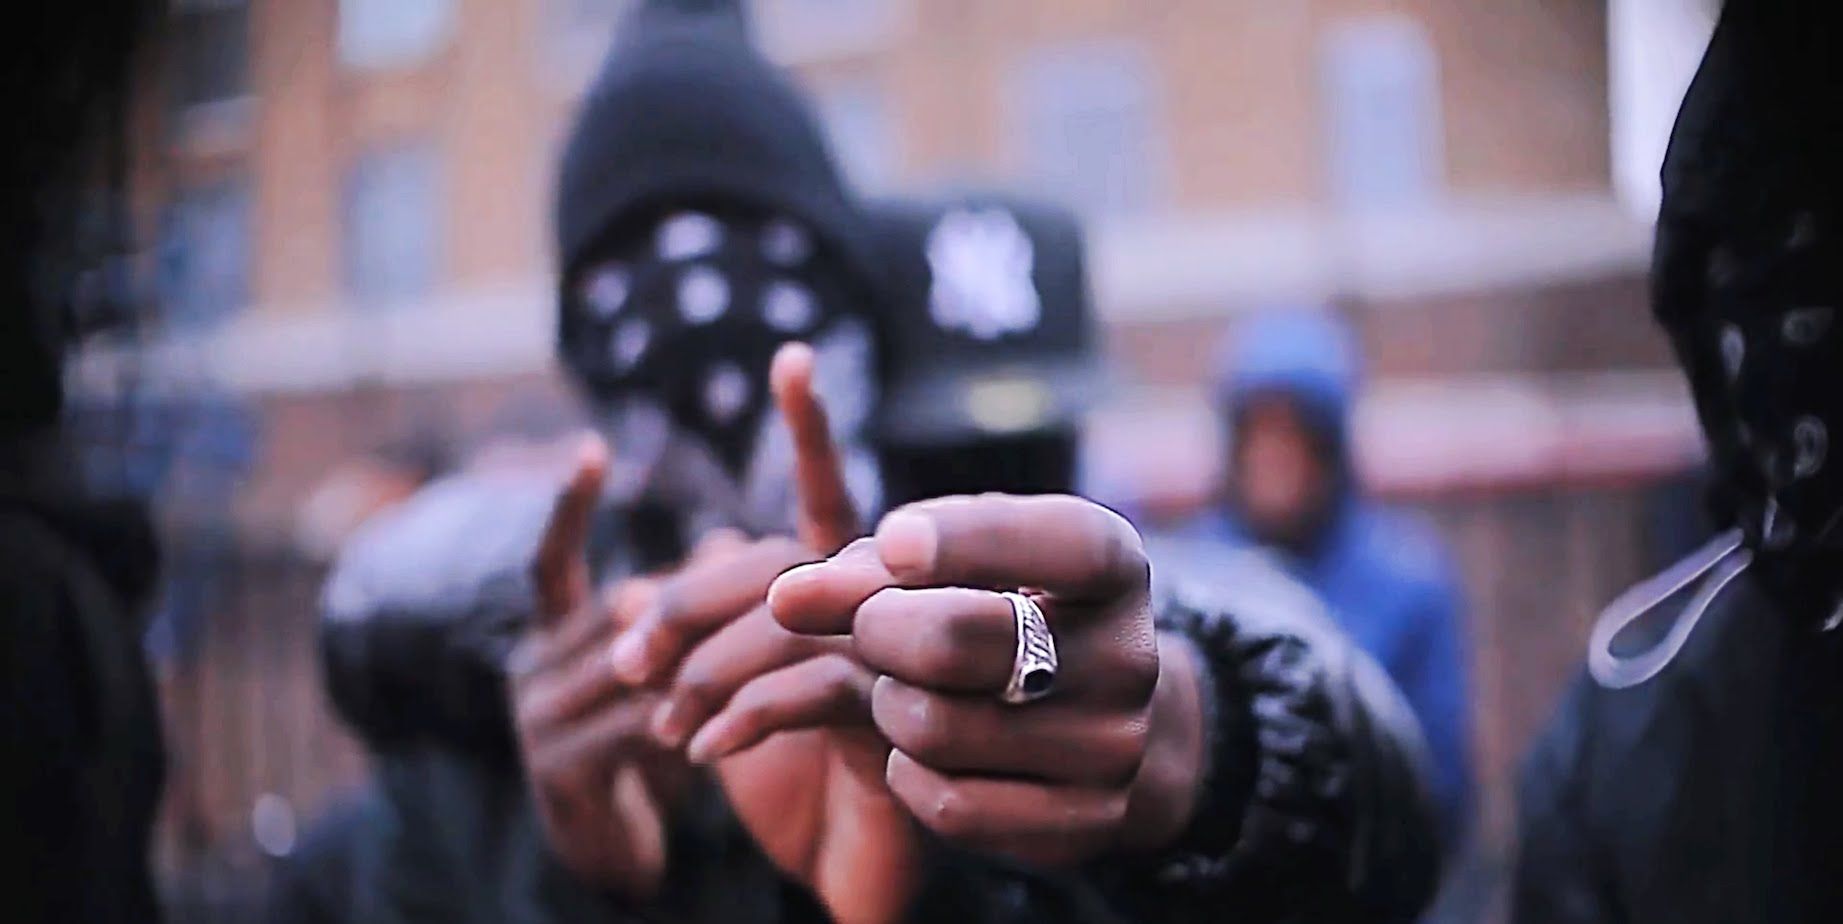 The Best Of Uk Brixton Drill Music Videos Mix